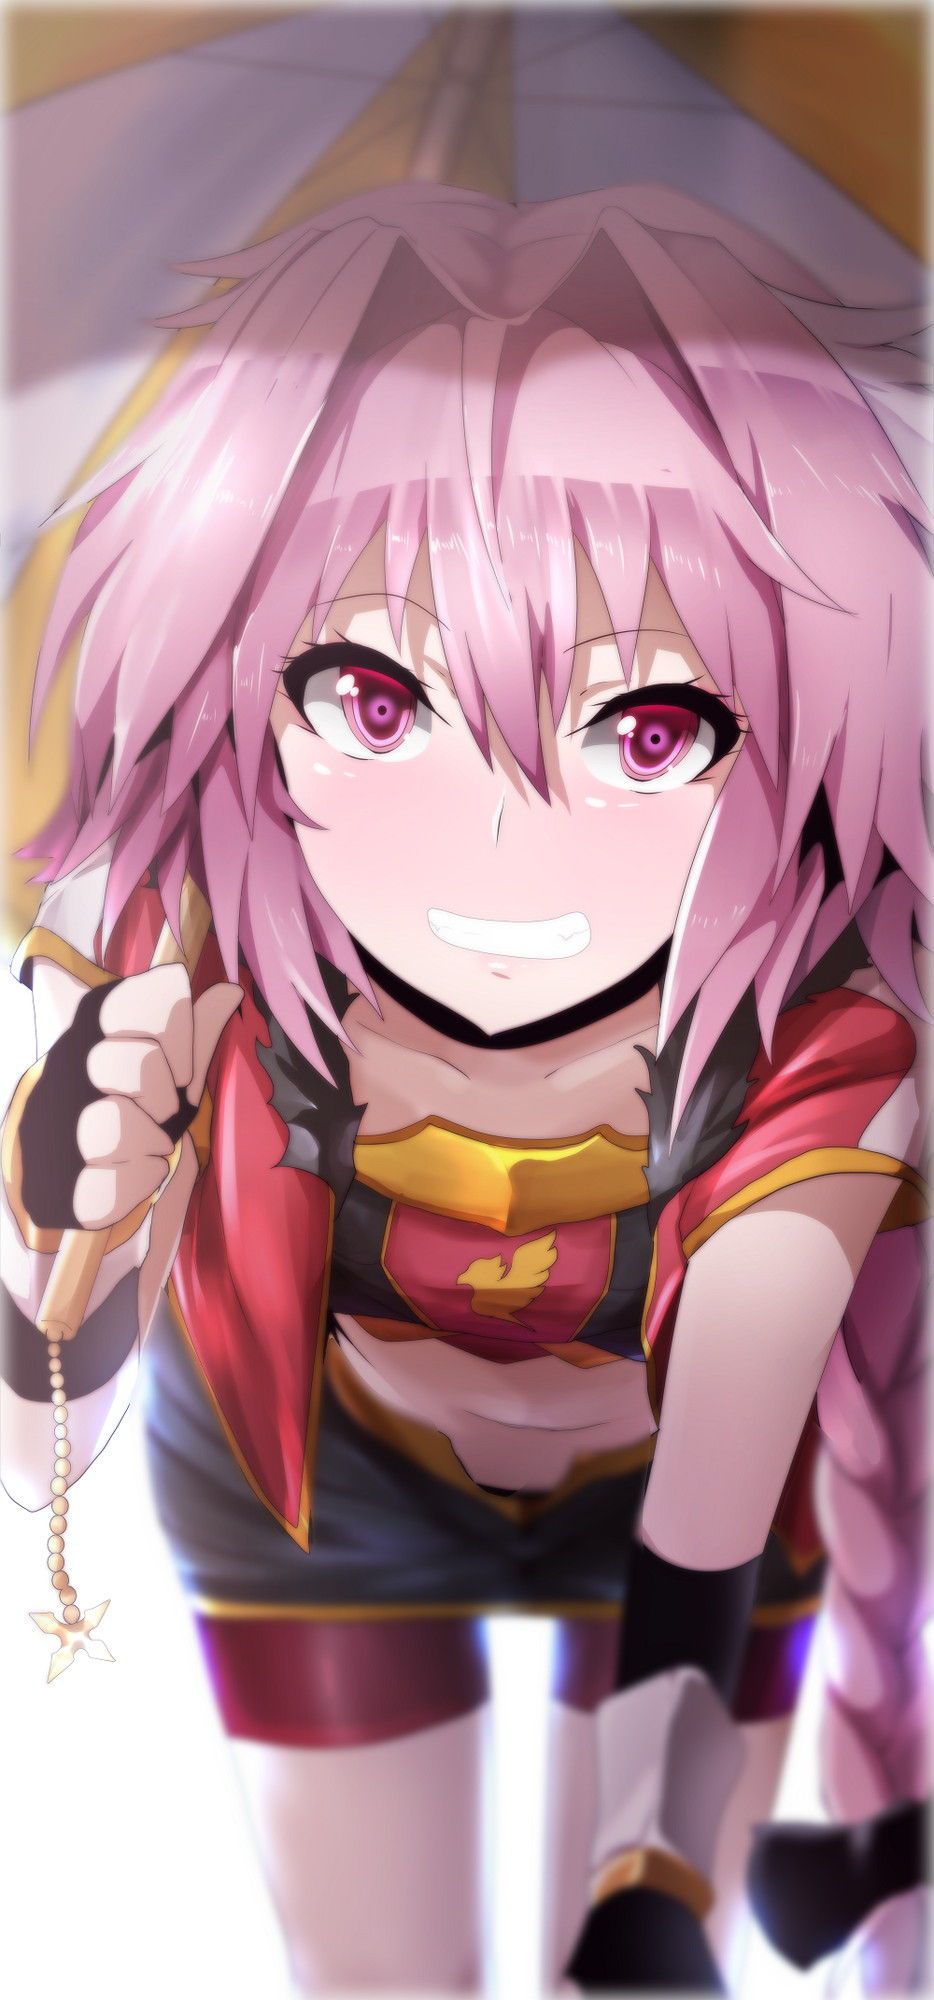 [Fate Grand Order] Astorfo cute picture furnace image Summary 11